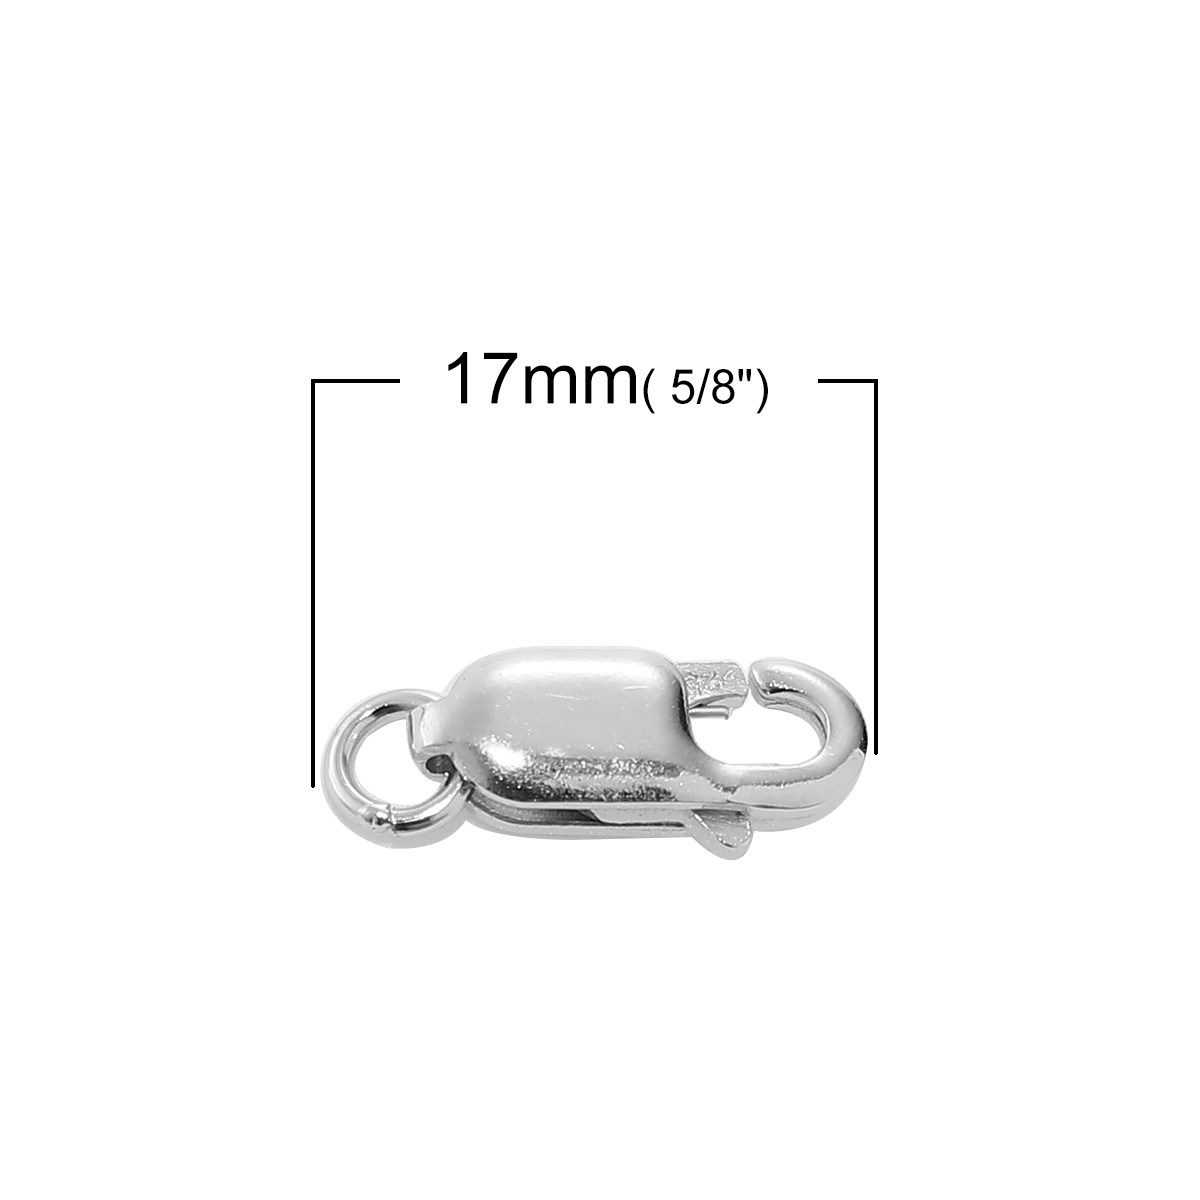 Picture of Sterling Silver Lobster Clasp Findings Silver Tone W/ Closed Soldered Jump Ring 17mm( 5/8") x 7mm( 2/8"), 2 PCs